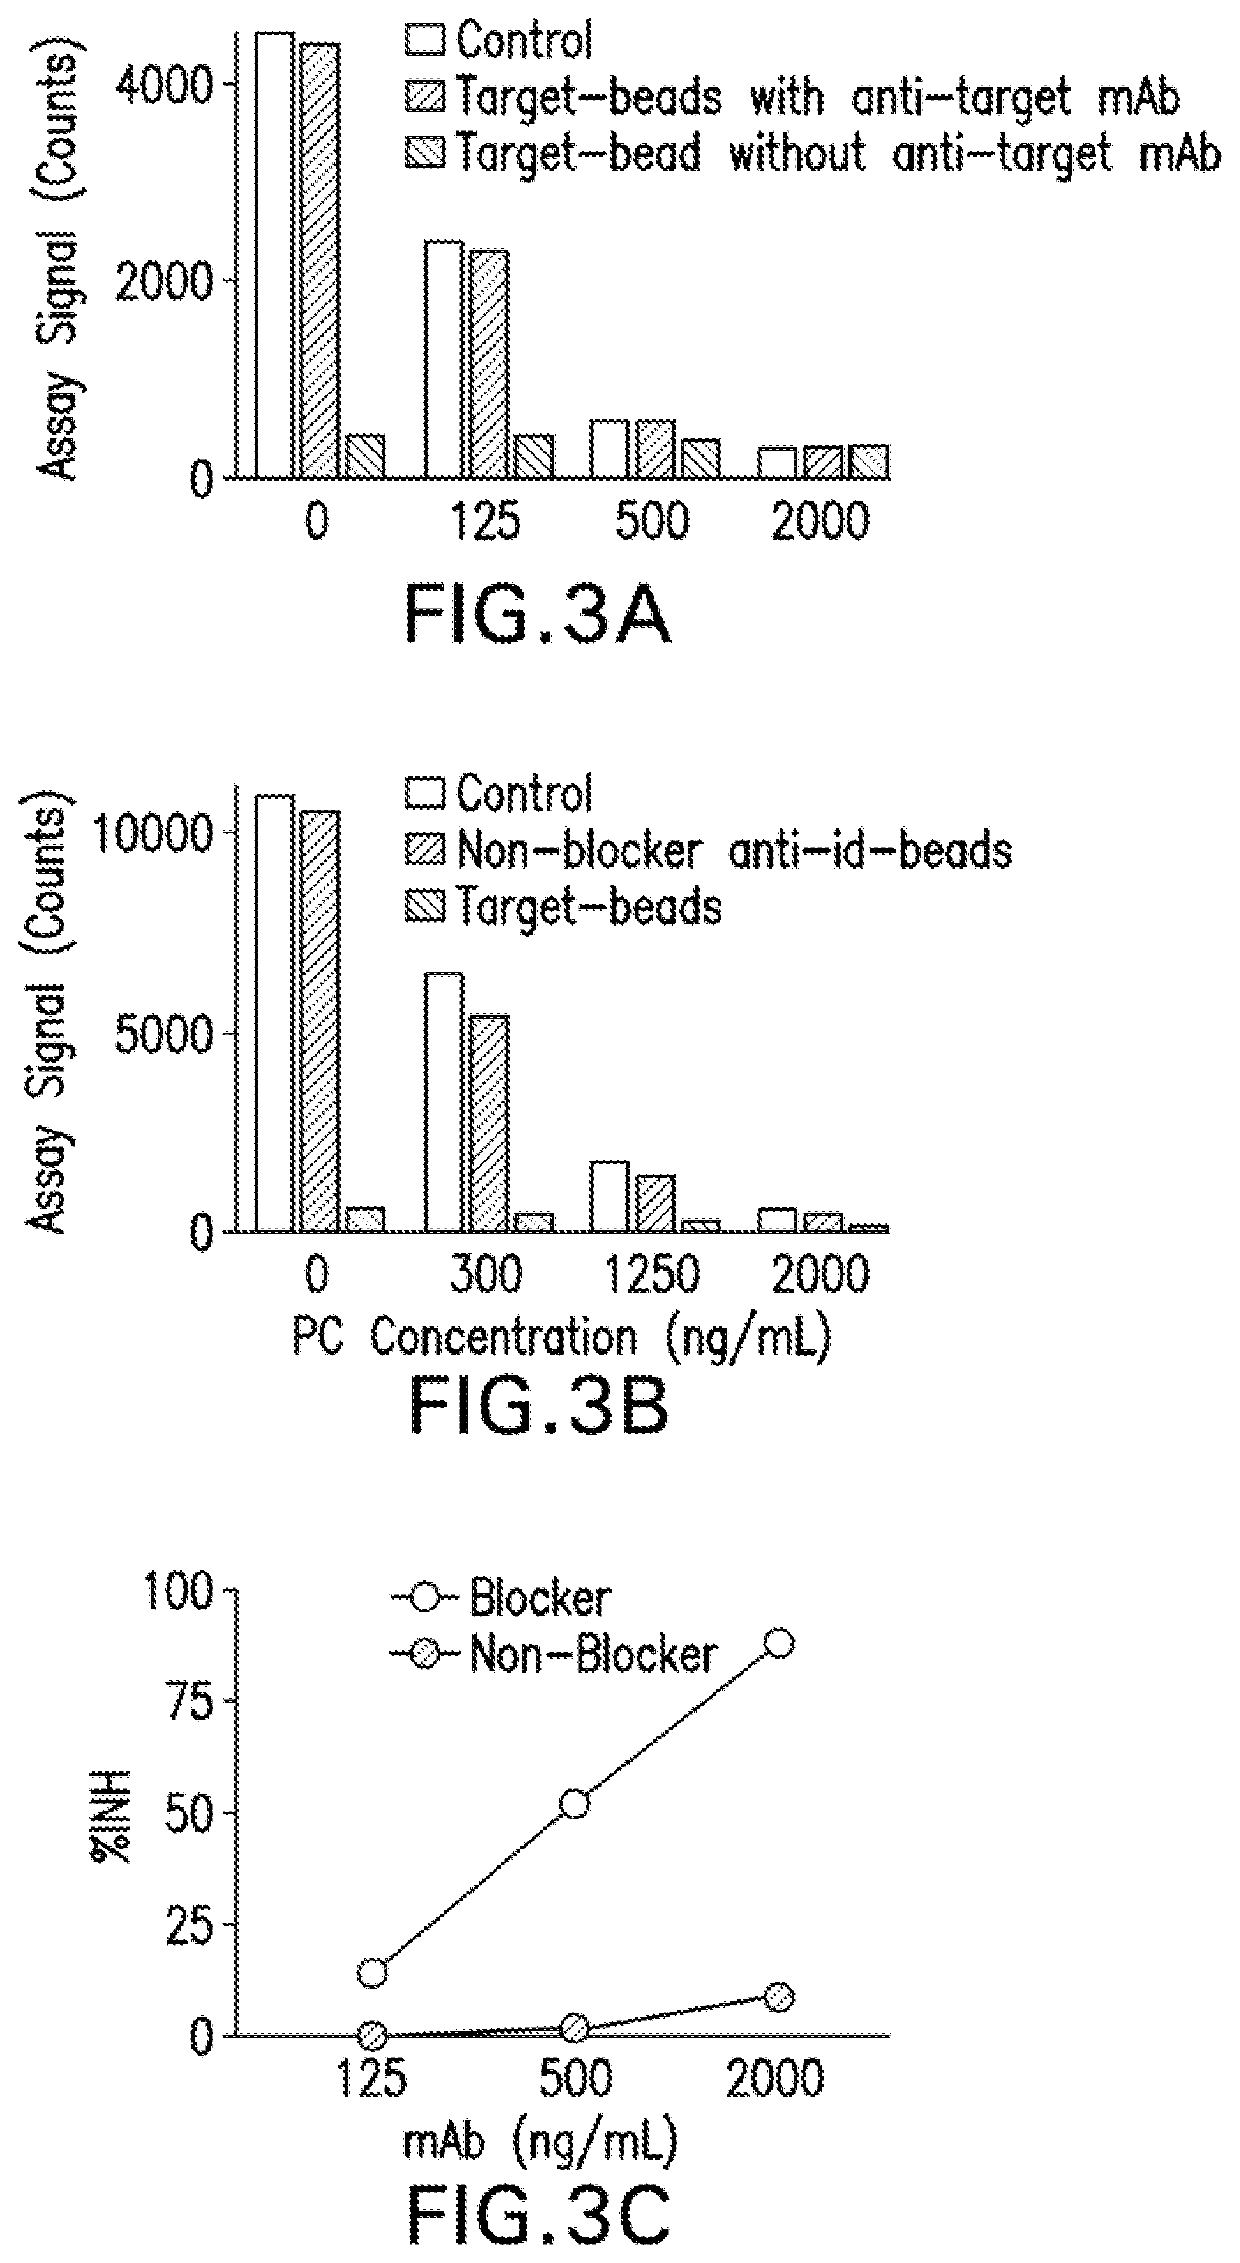 Competitive Ligand Binding Assays